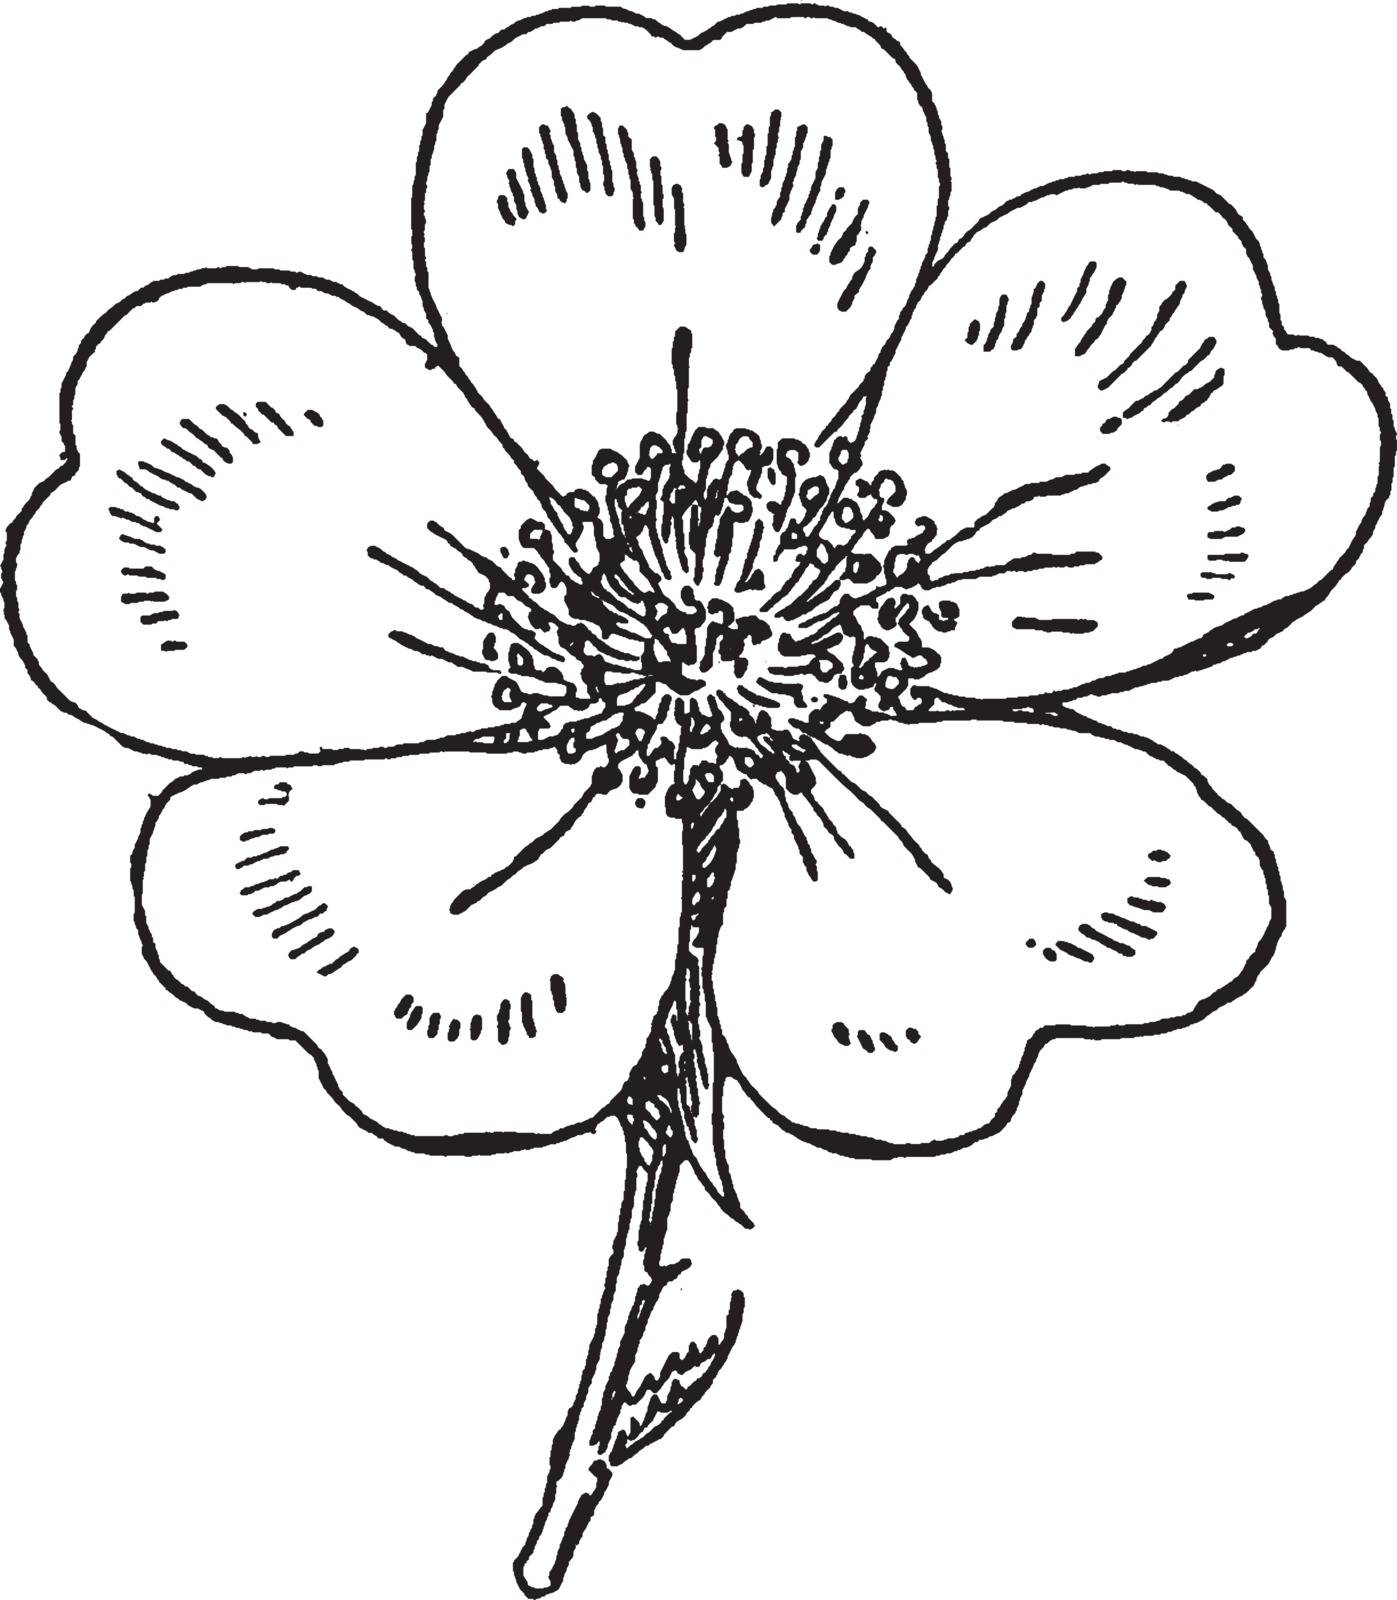 It is known as yellow petal flowers. The petal heart shaped with five petals, vintage line drawing or engraving illustration.